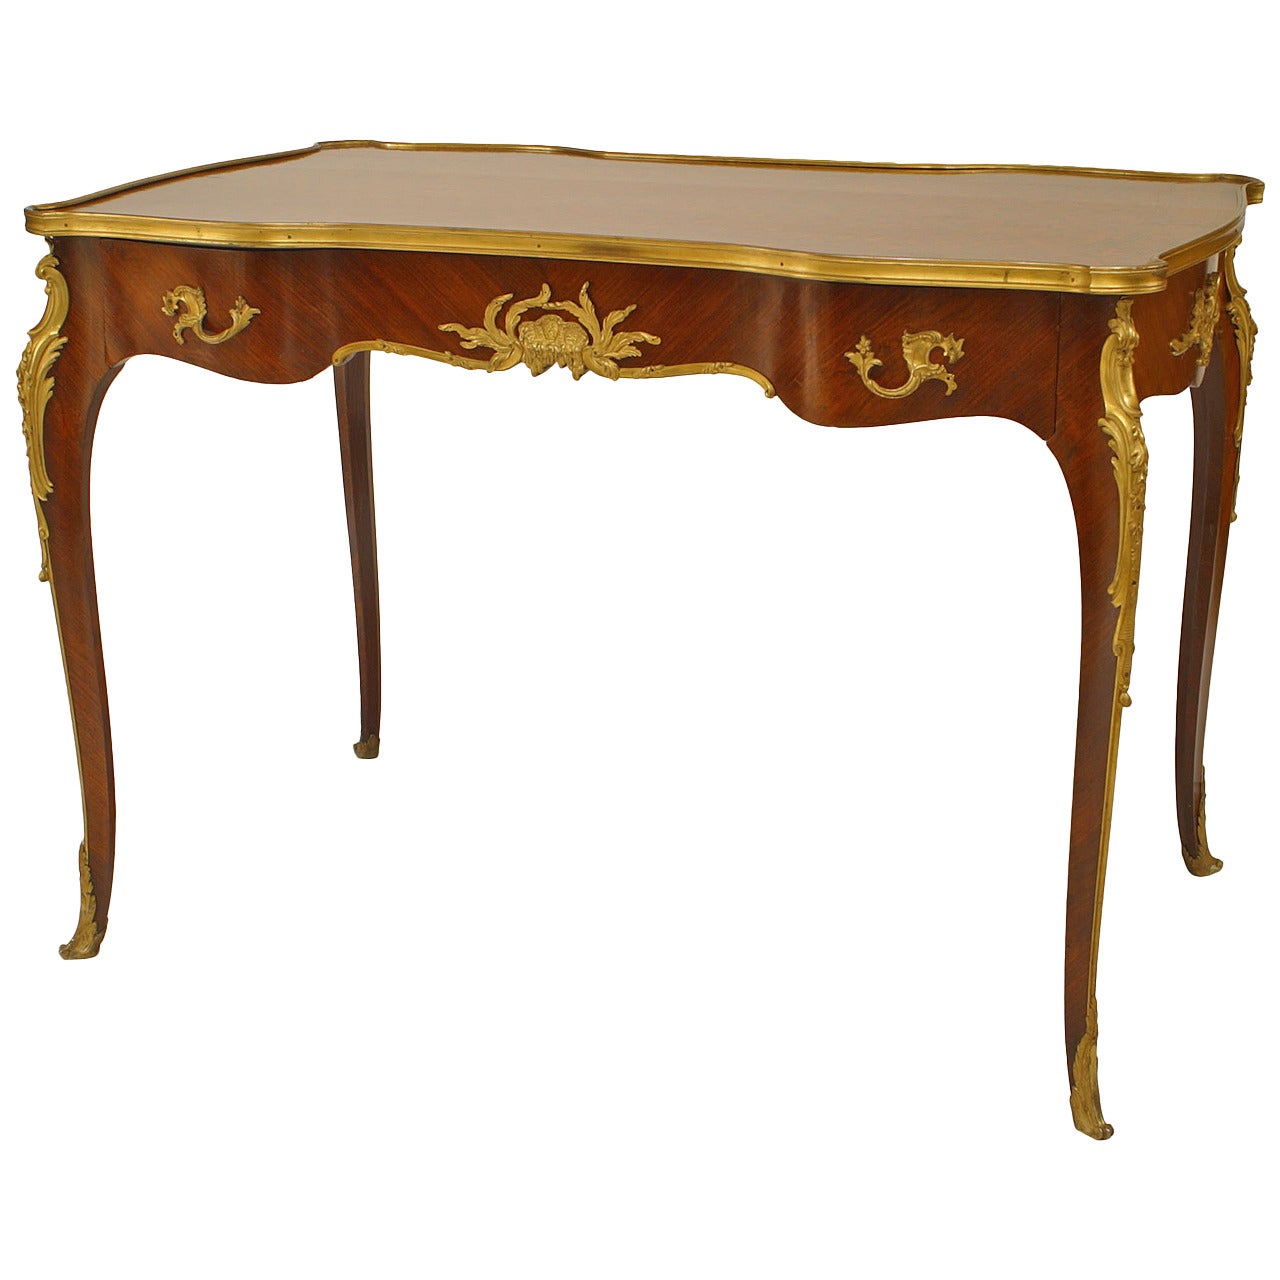 French Louis XV Style Kingwood Table Desk with Parquetry Inlay